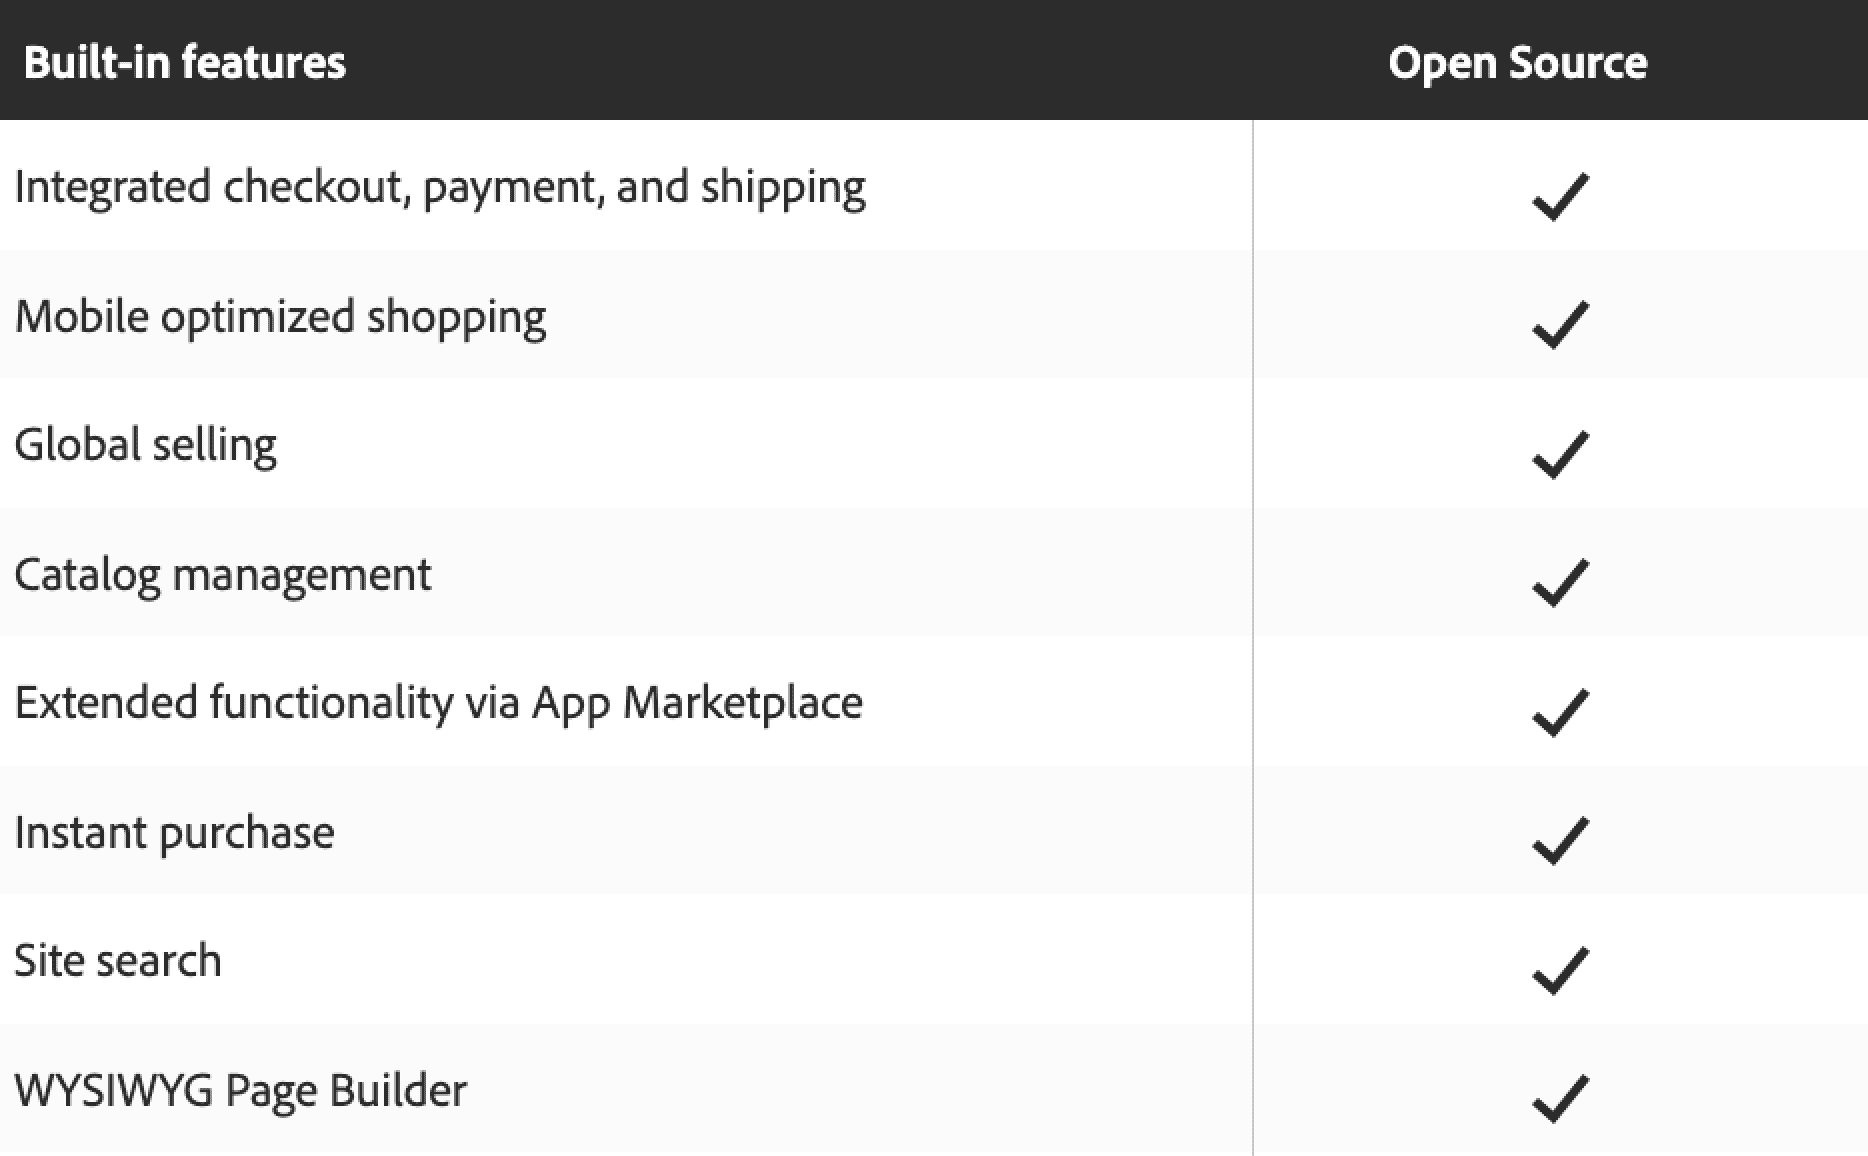 Magento Open Source is free to install, modify, and use for everyone